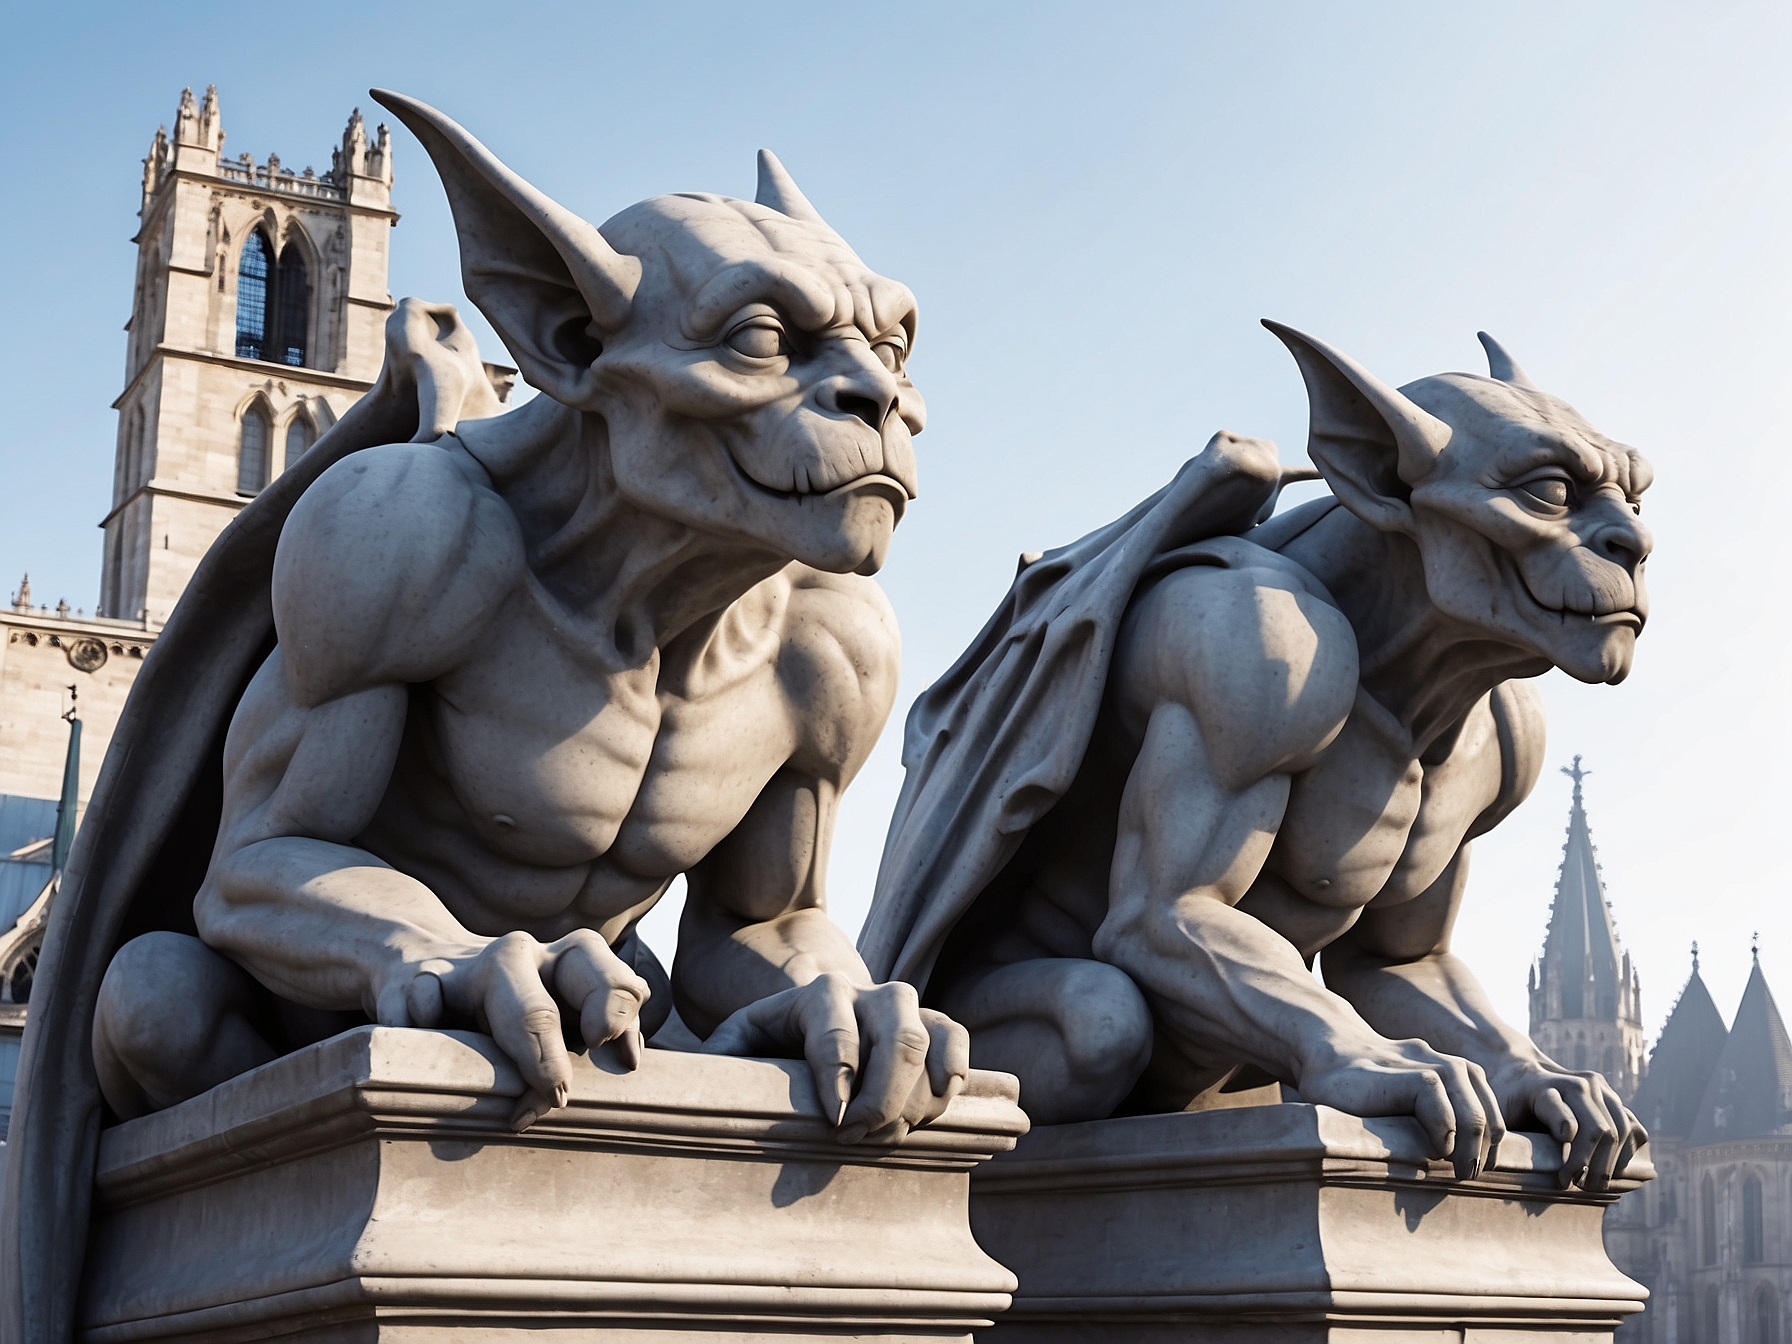 A photograph depicts two intricately carved gargoyle statues perched on the edge of a building's rooftop. The gargoyles, with their exaggerated features and menacing expressions, appear to be guarding the structure below. Each gargoyle has large, bat-like wings folded against its back, and its body is covered in elaborate, textured scales. Despite their stone composition, the gargoyles seem almost lifelike, their eyes glinting in the sunlight. In the background, a cloudy sky adds to the atmospheric scene, creating a sense of mystery and intrigue.